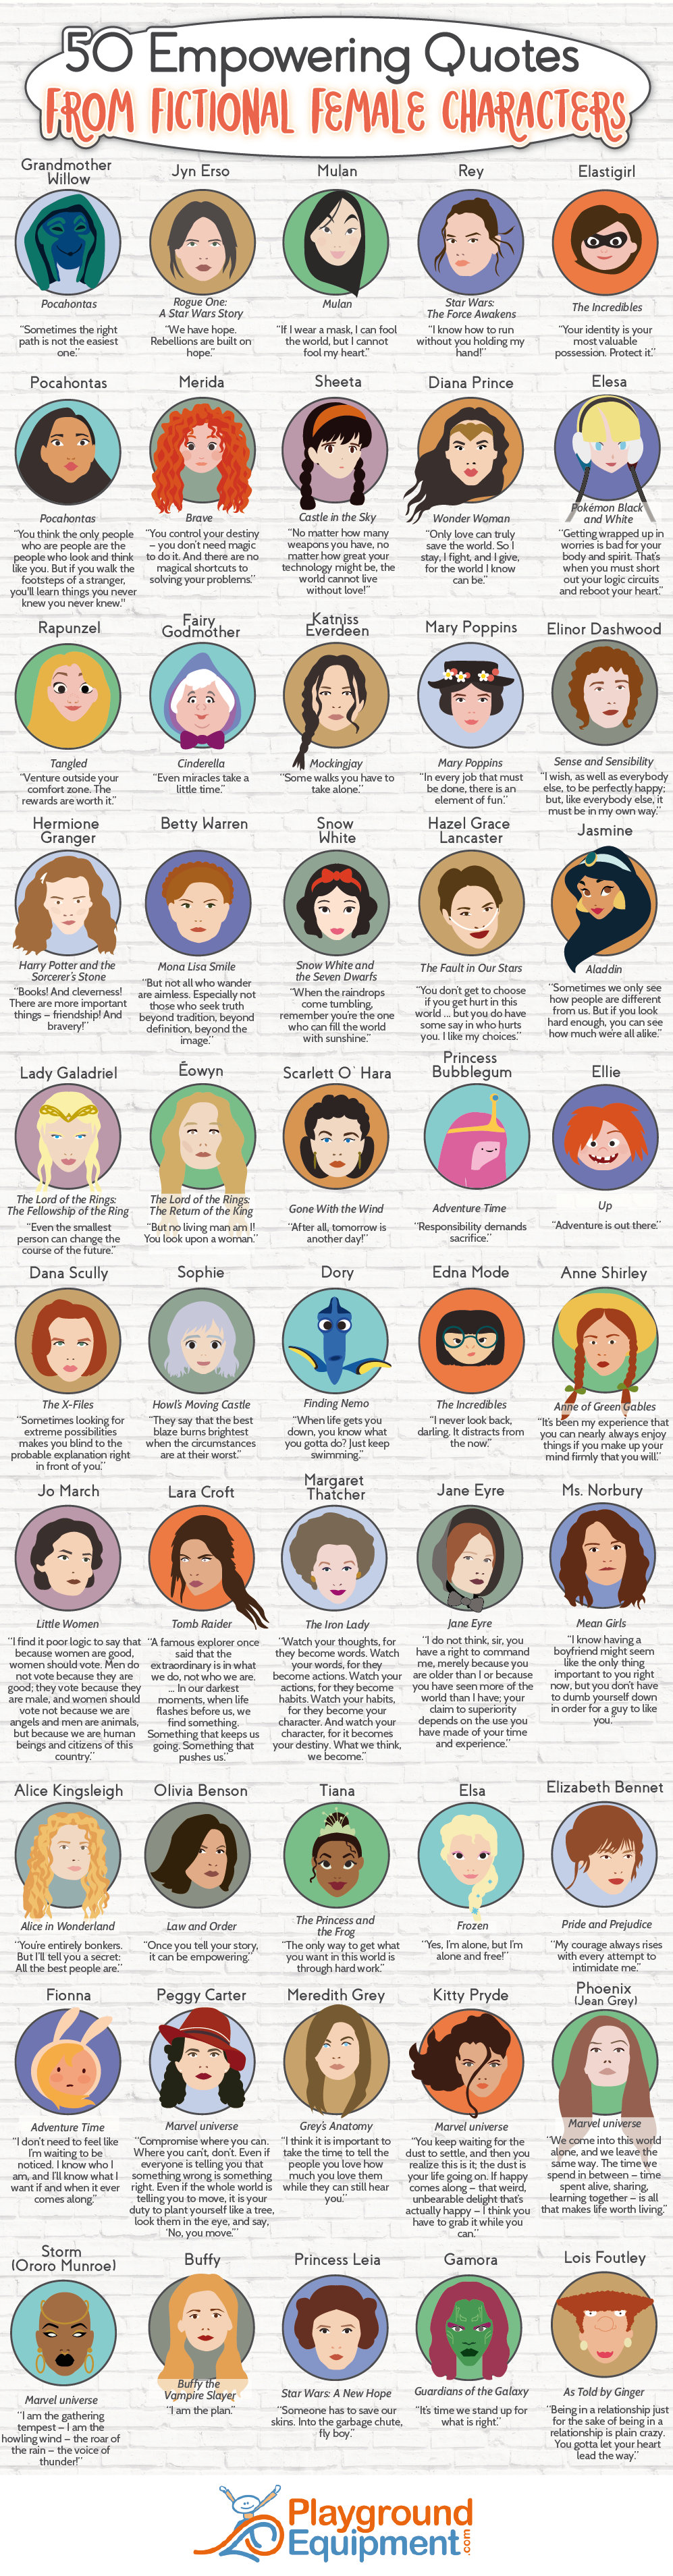 50 Empowering Quotes From Fictional Female Characters